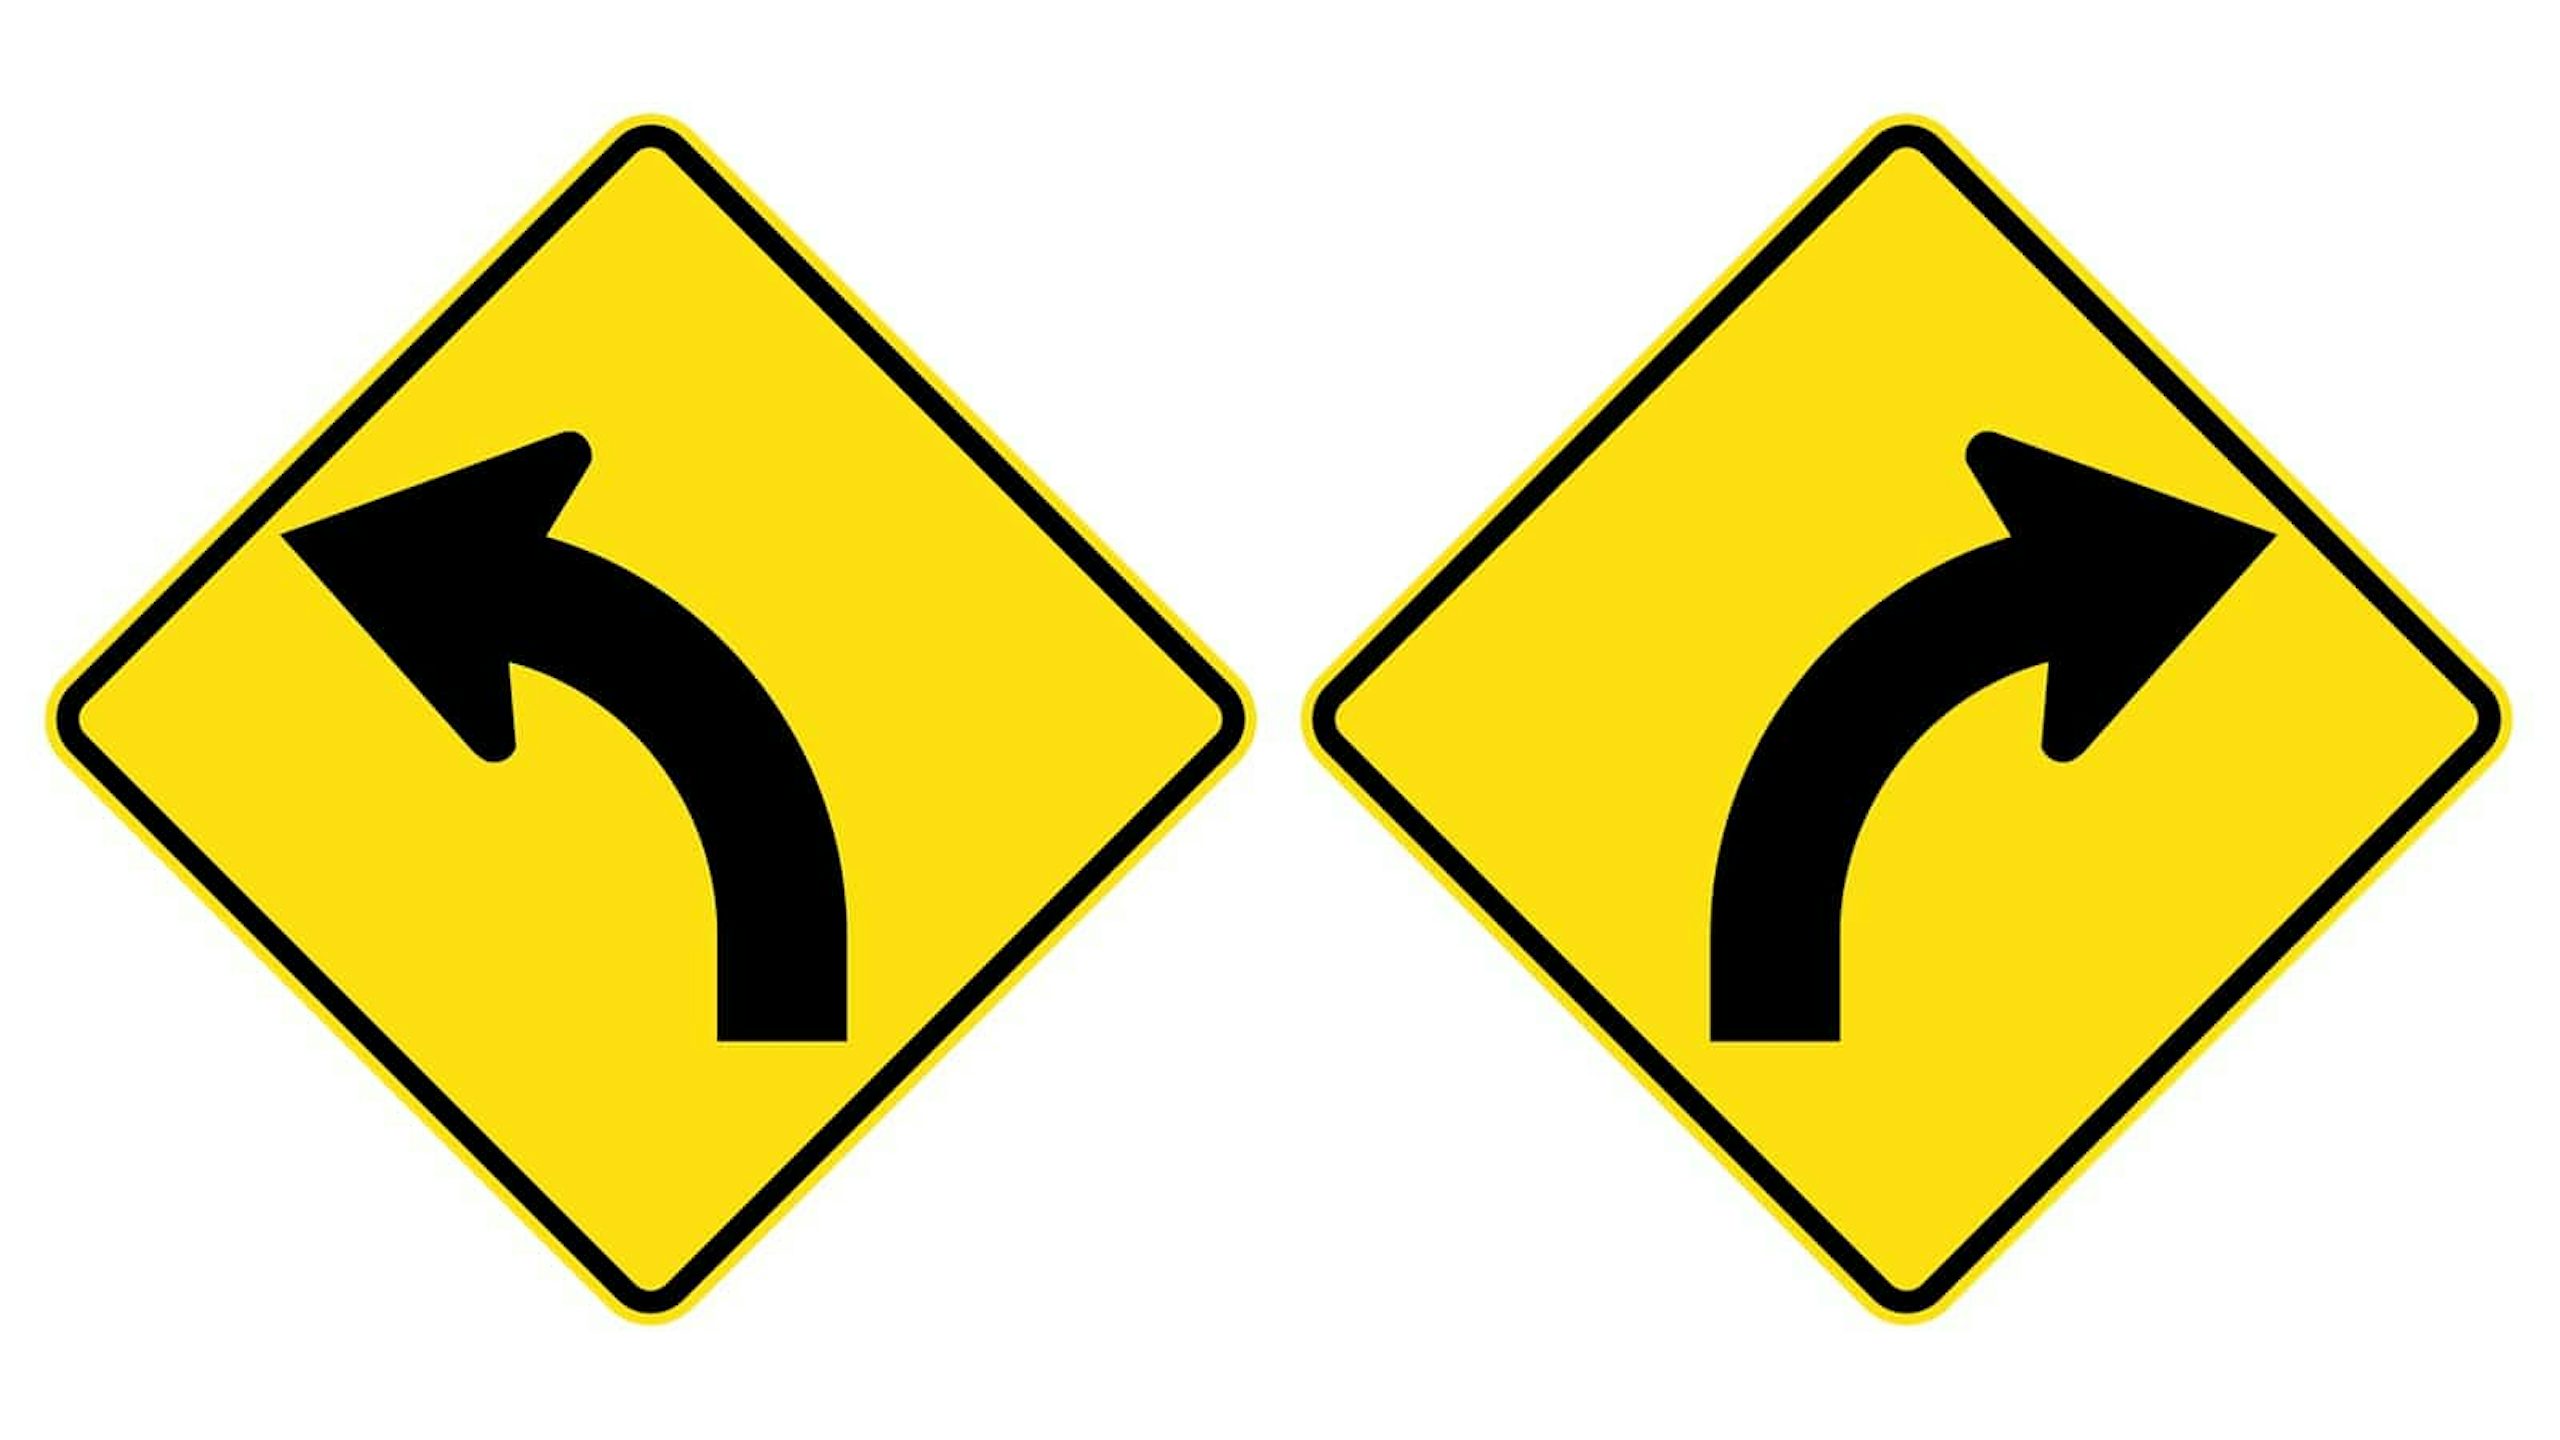 cross road sign meaning